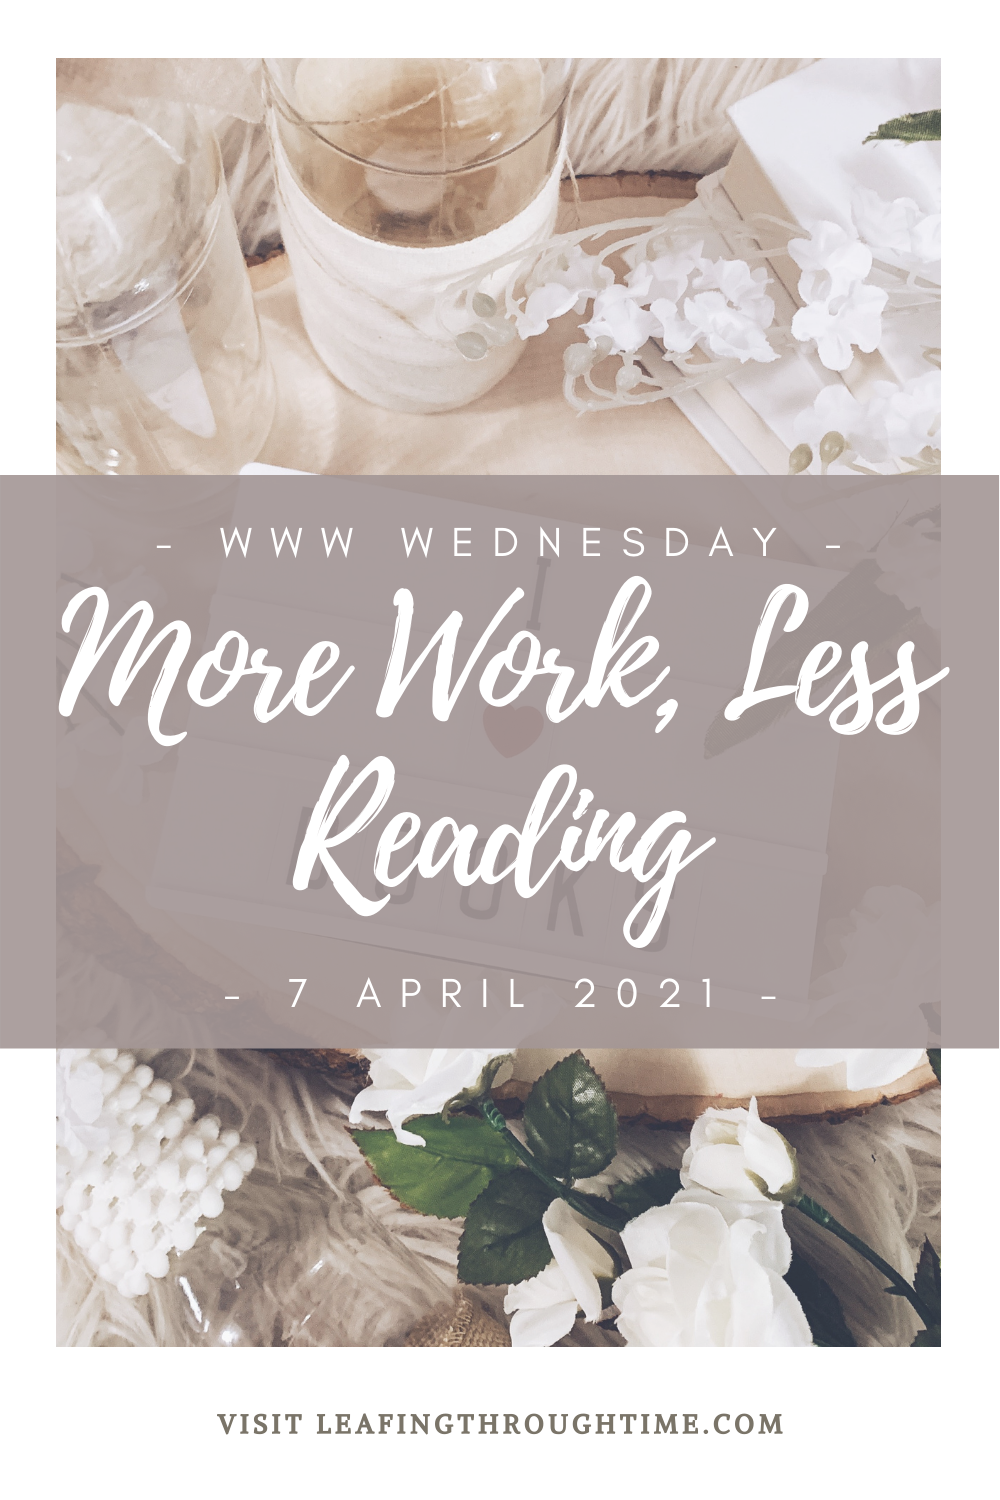 WWW Wednesday – More Work, Less Reading